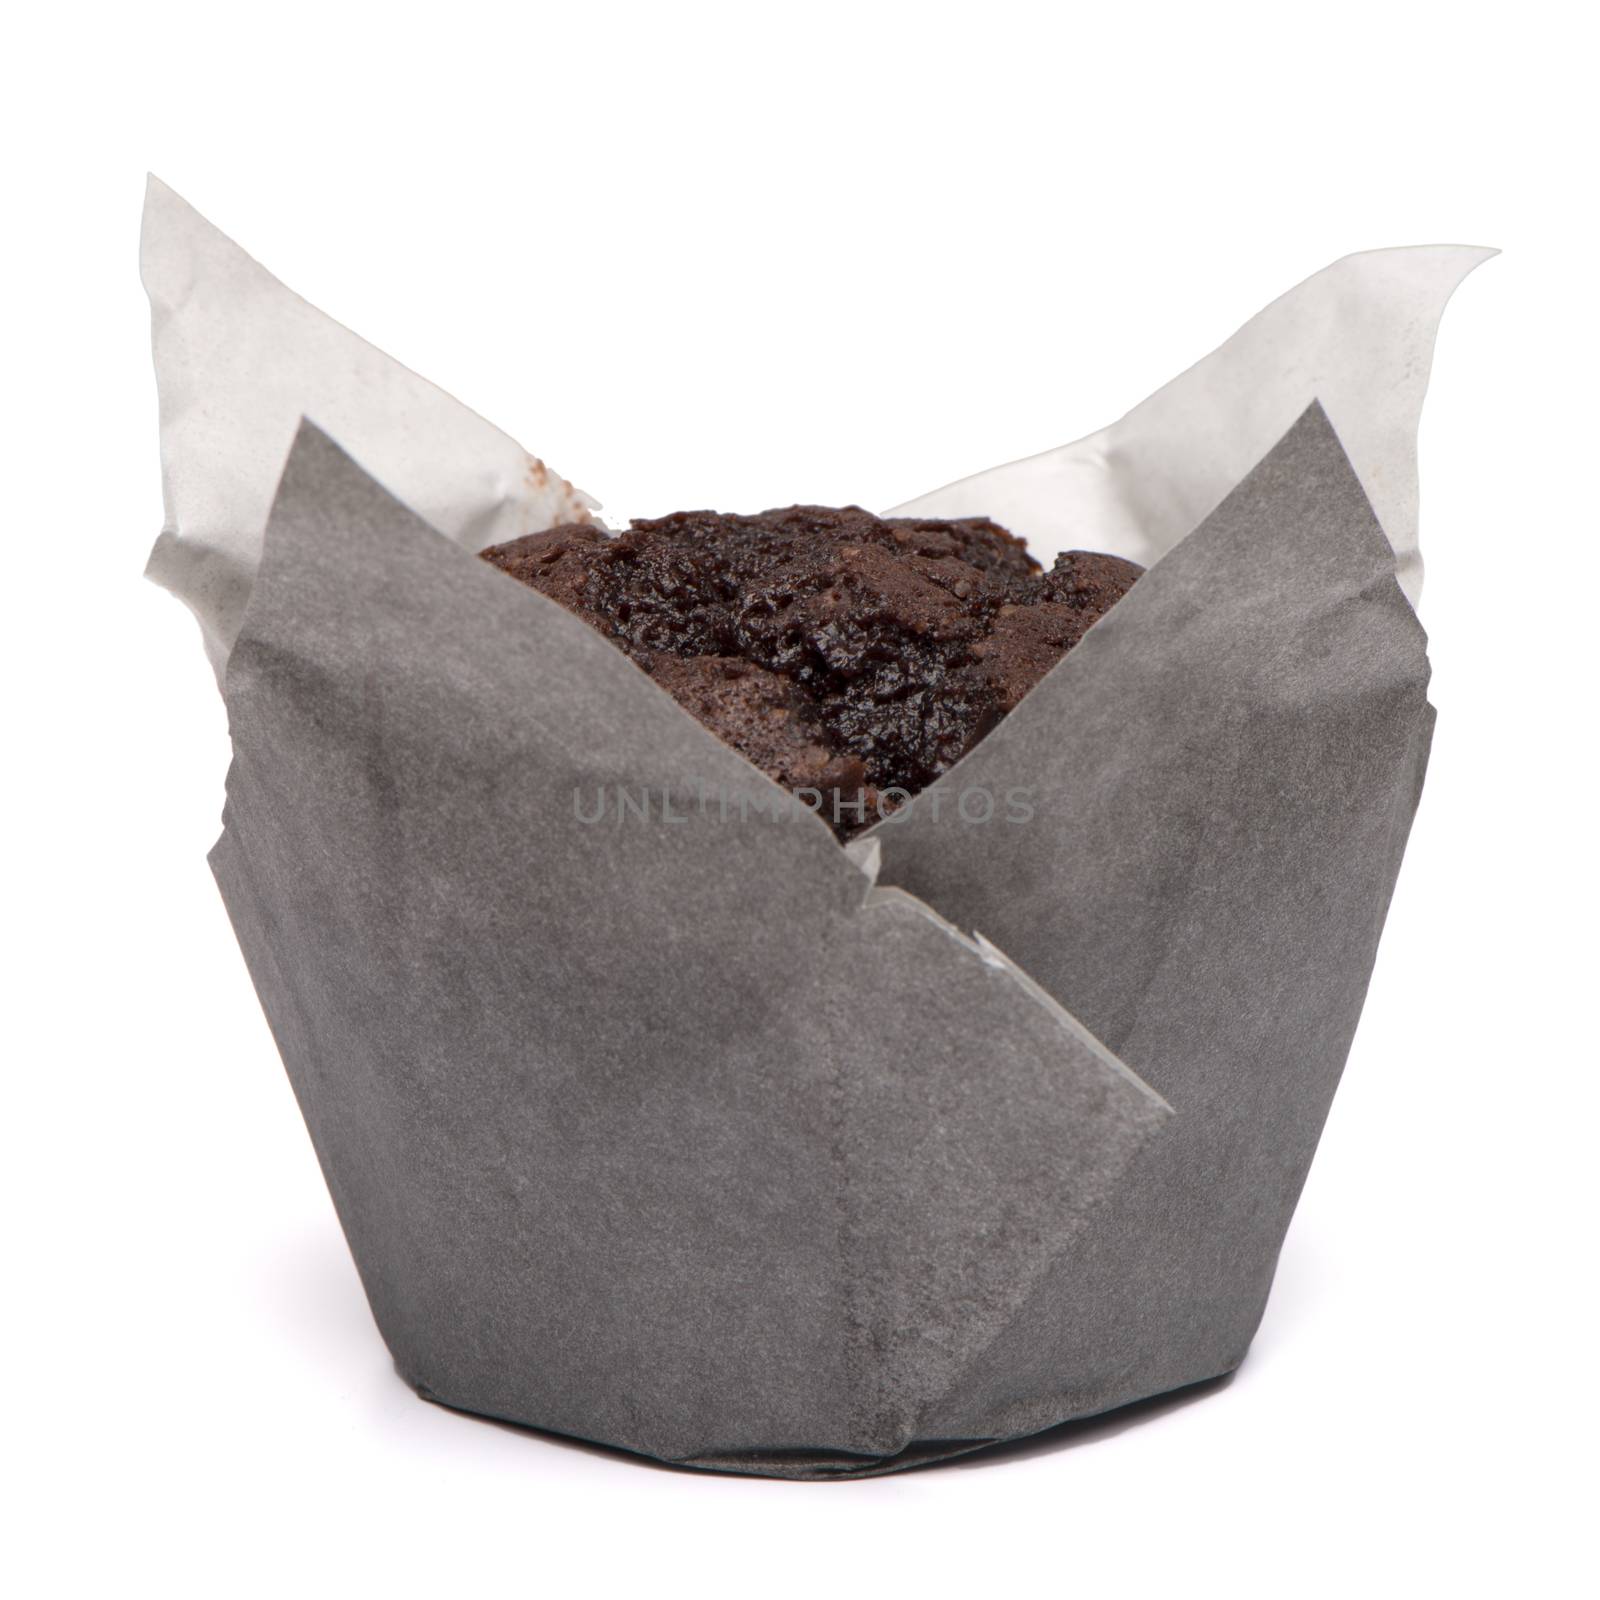 Closeup of a Magdalena Typical Spanish Chocolate Muffin. Sweet Food or Dessert. One Fresh Baked Muffin Isolated on White Background in American Style. Irresistible Tasty Cake.